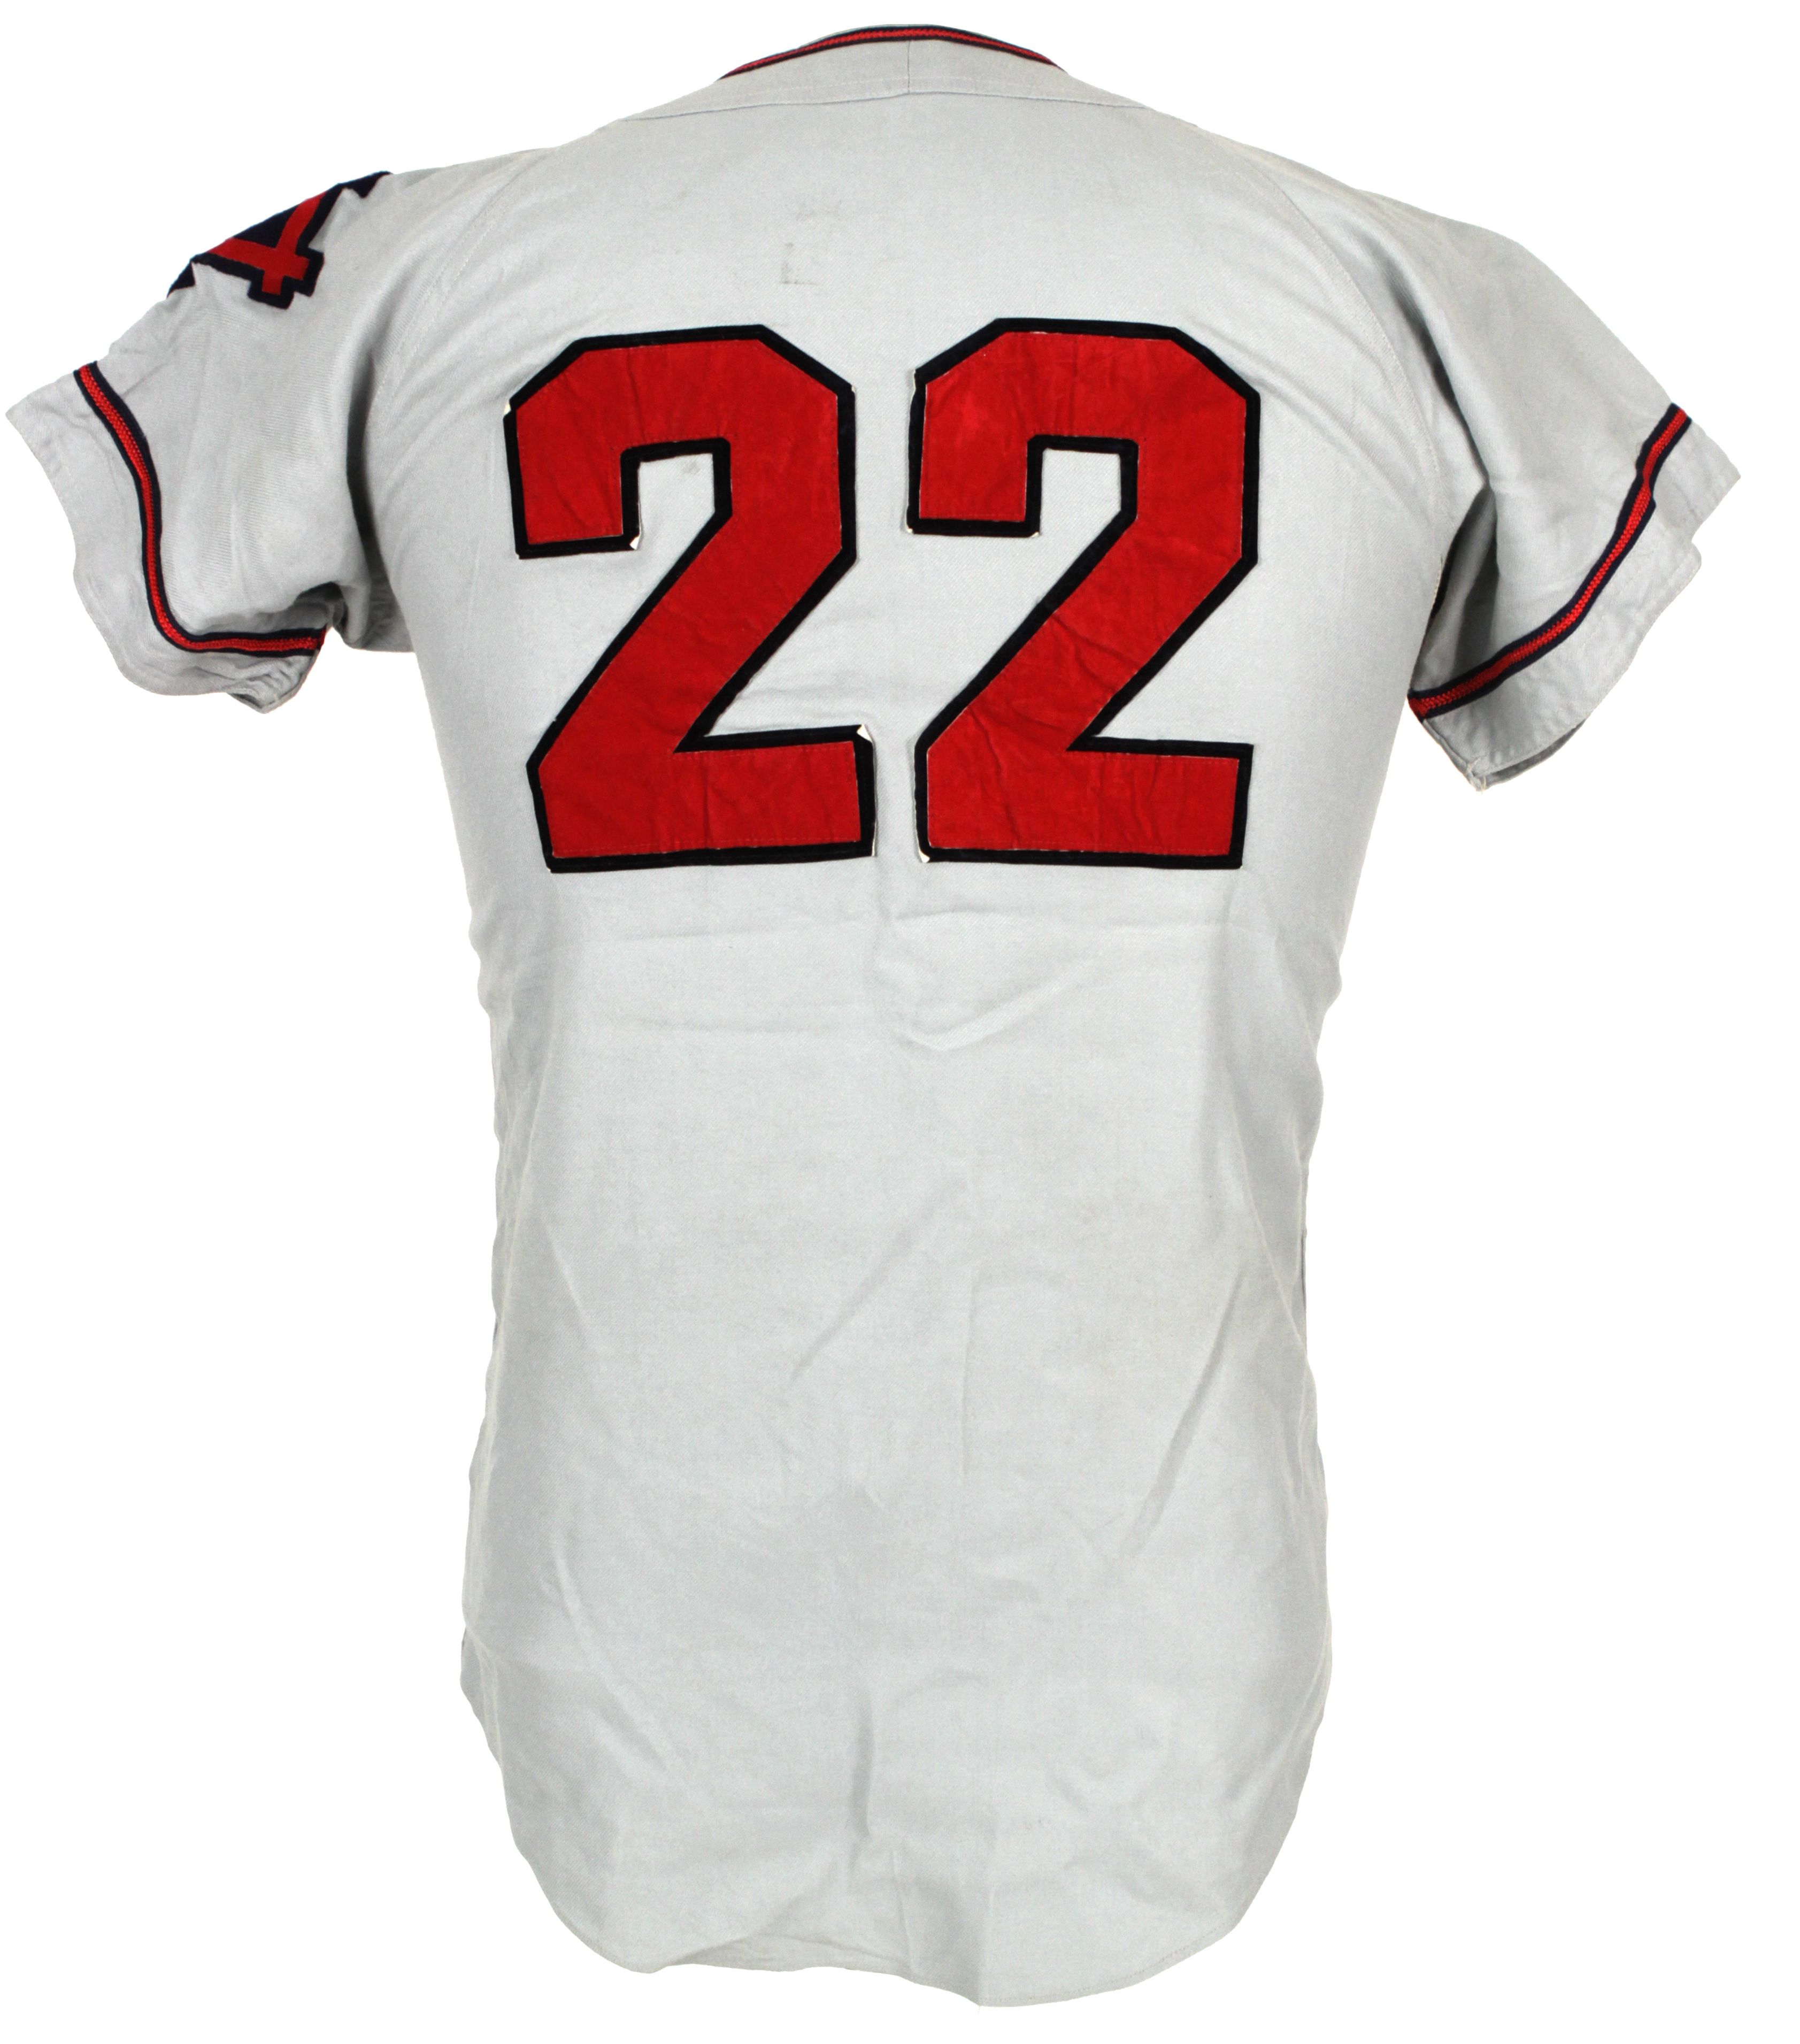 2015 Cleveland Indians by the (uniform) numbers, #41 and up - Covering the  Corner